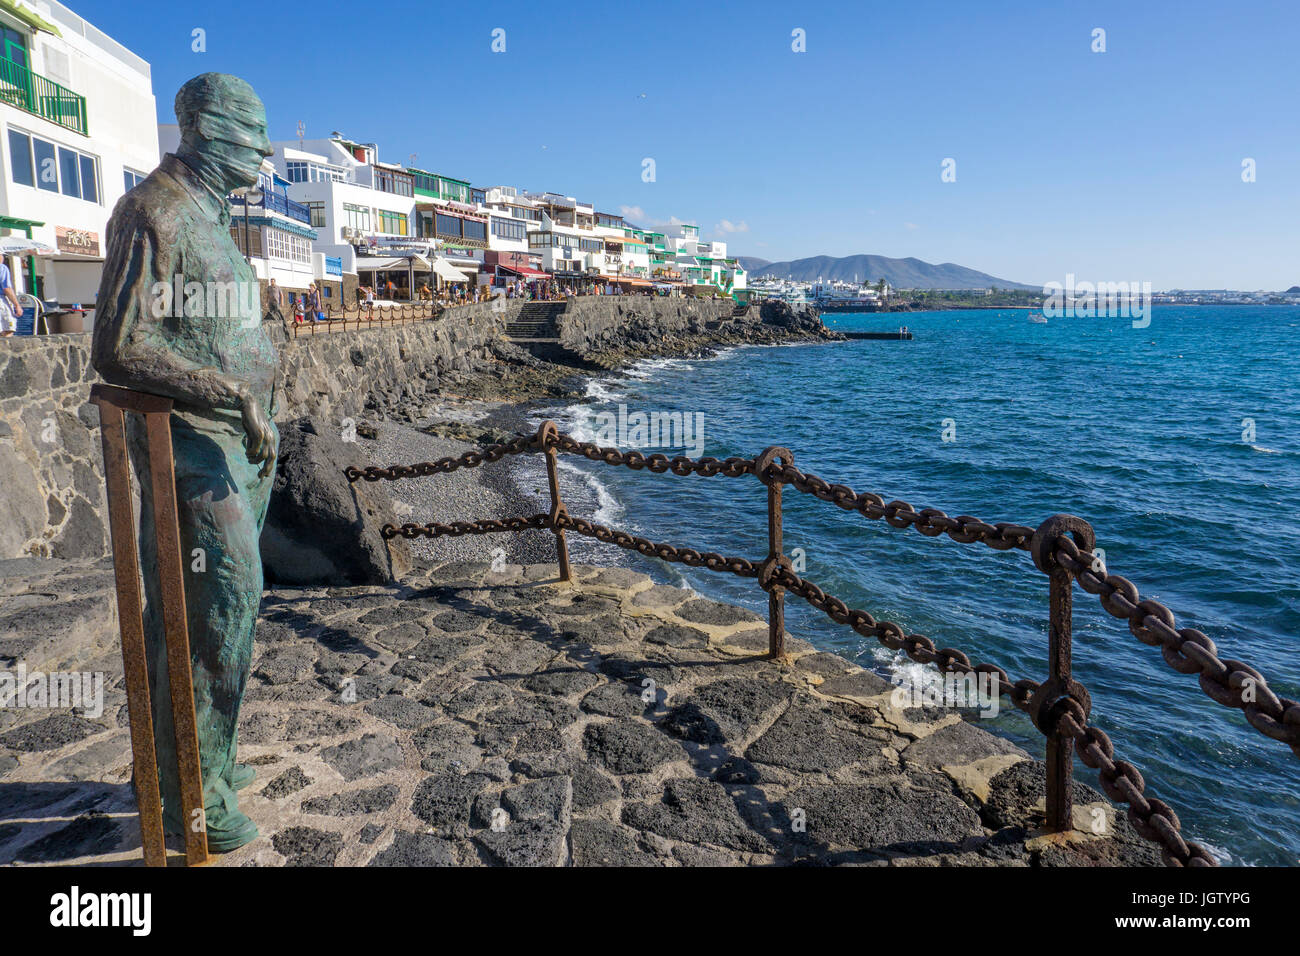 Bronze statue in honour of the old canarian generation from artist Chano Navarro Betancor, at beach promenade Playa Blanca, Lanzarote, Canary islands Stock Photo